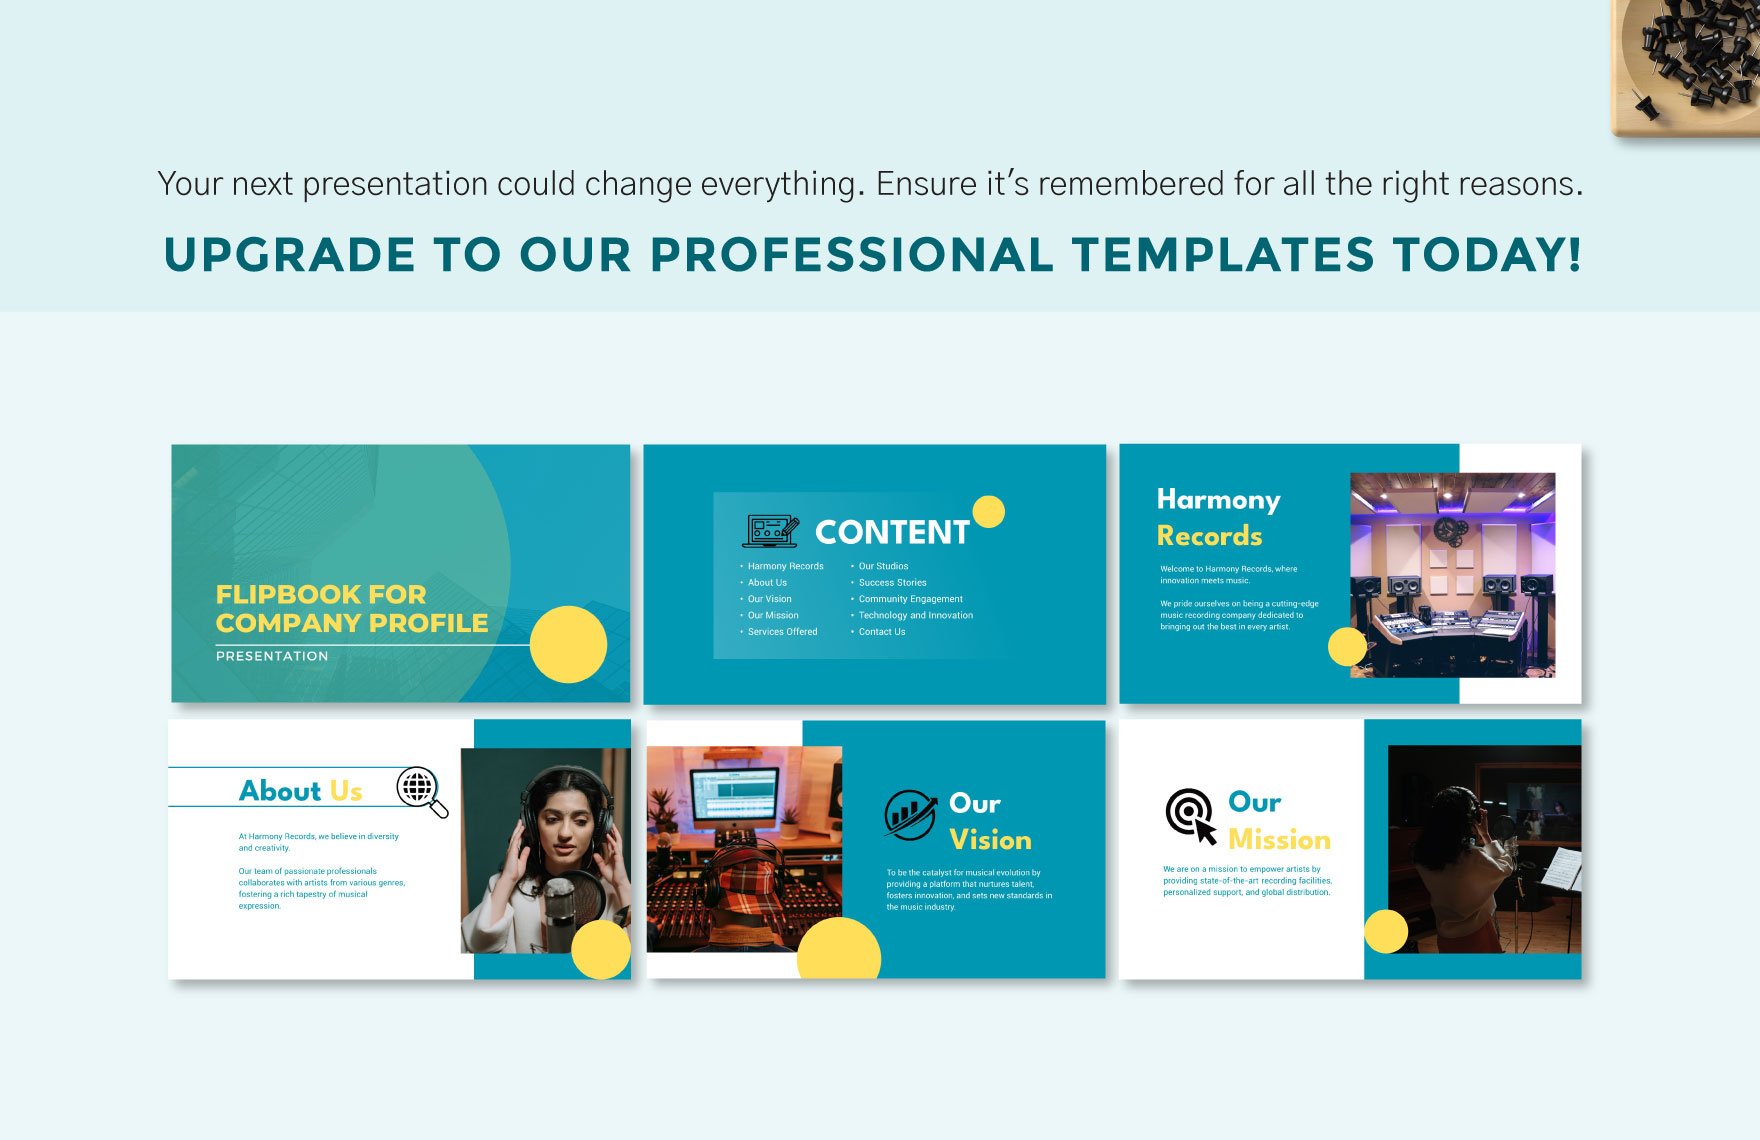 Flipbook Template for Company Profile